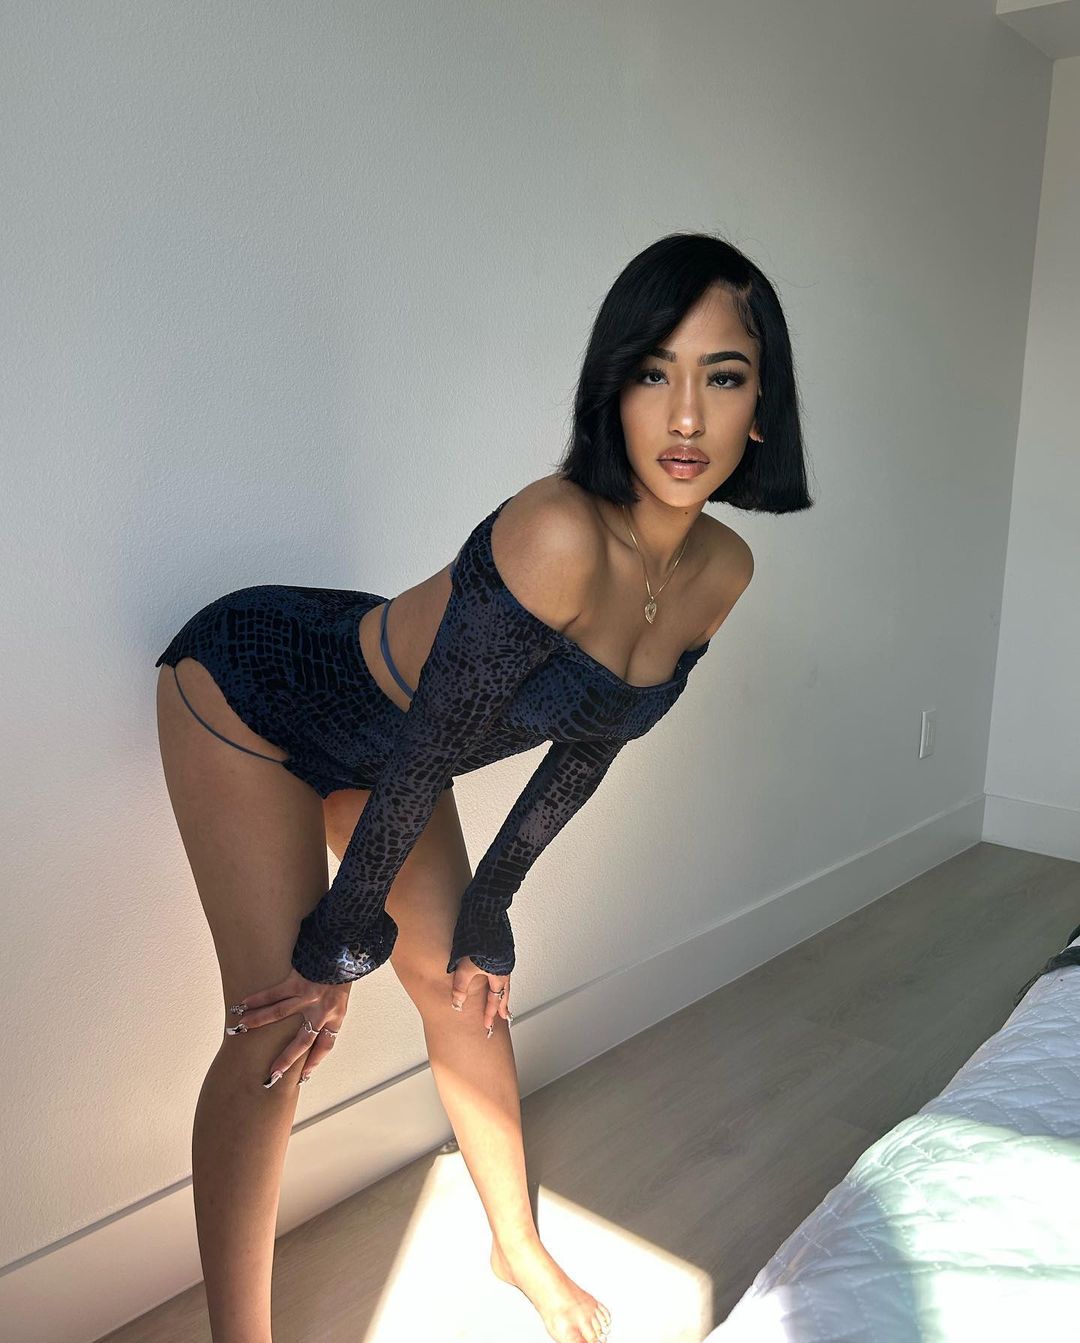 Asian Shemale In Stockings Solo - Asian Ladyboy Solo Stockings | Anal Dream House